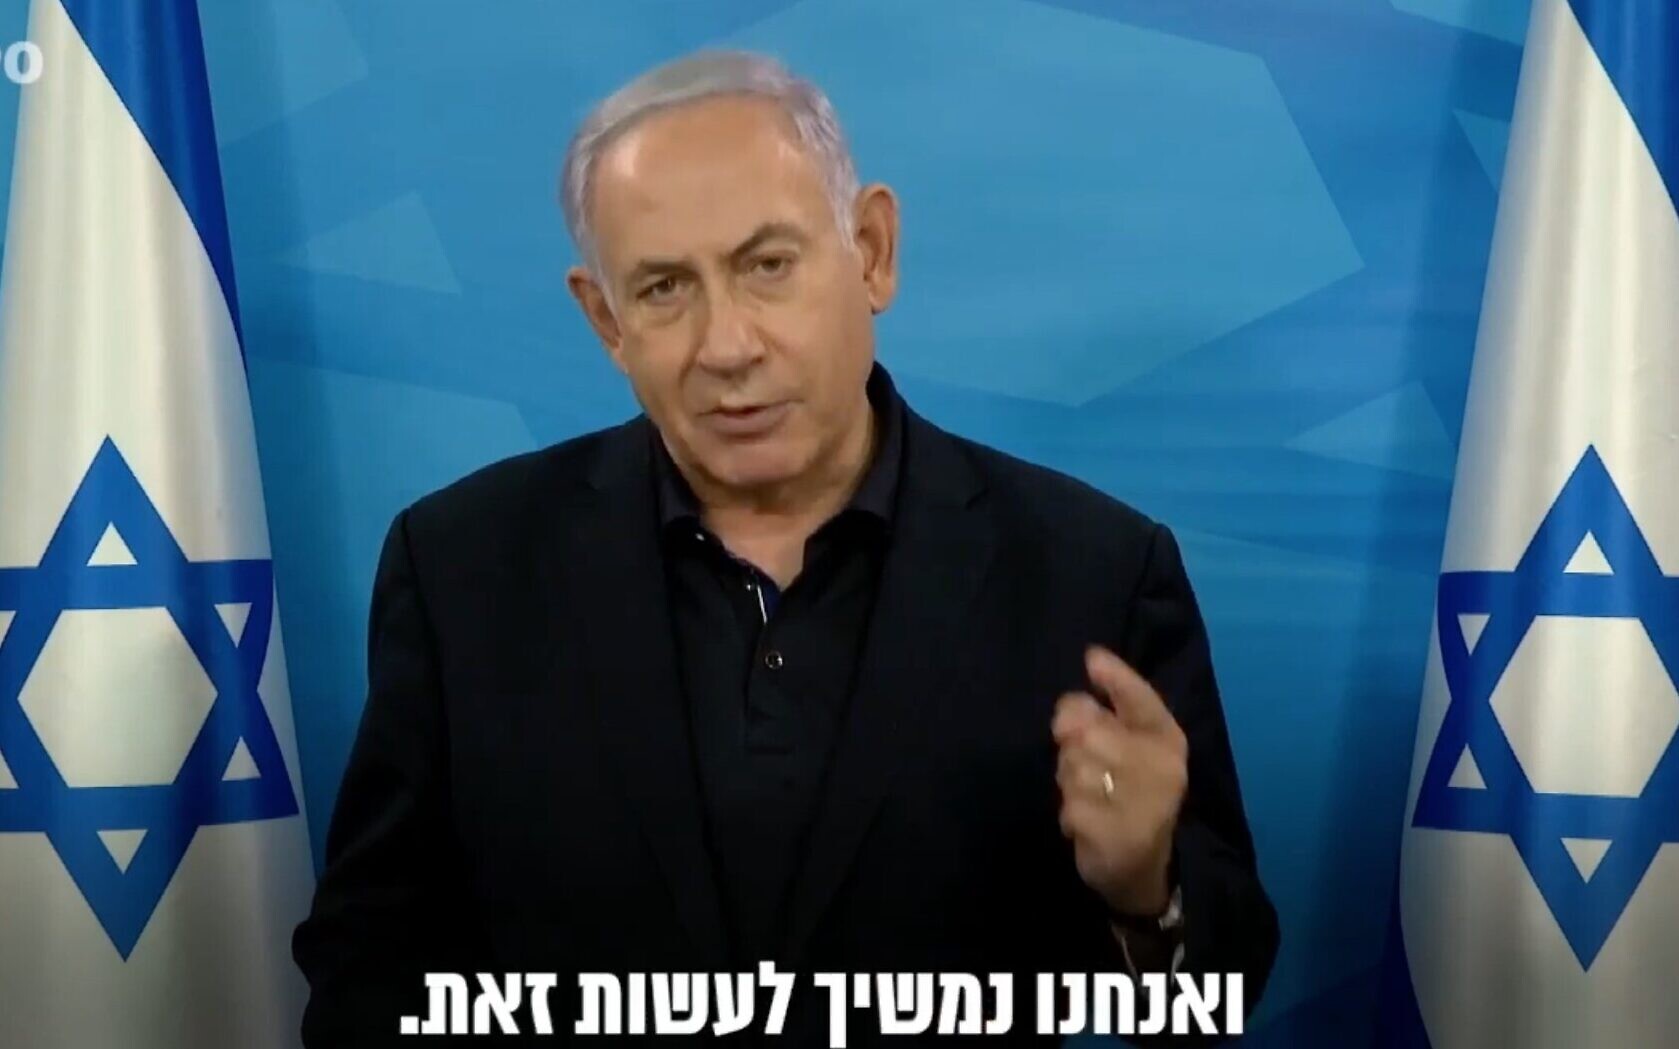 Netanyahu: We won't let the leaders of Hamas escape; 'this is not over